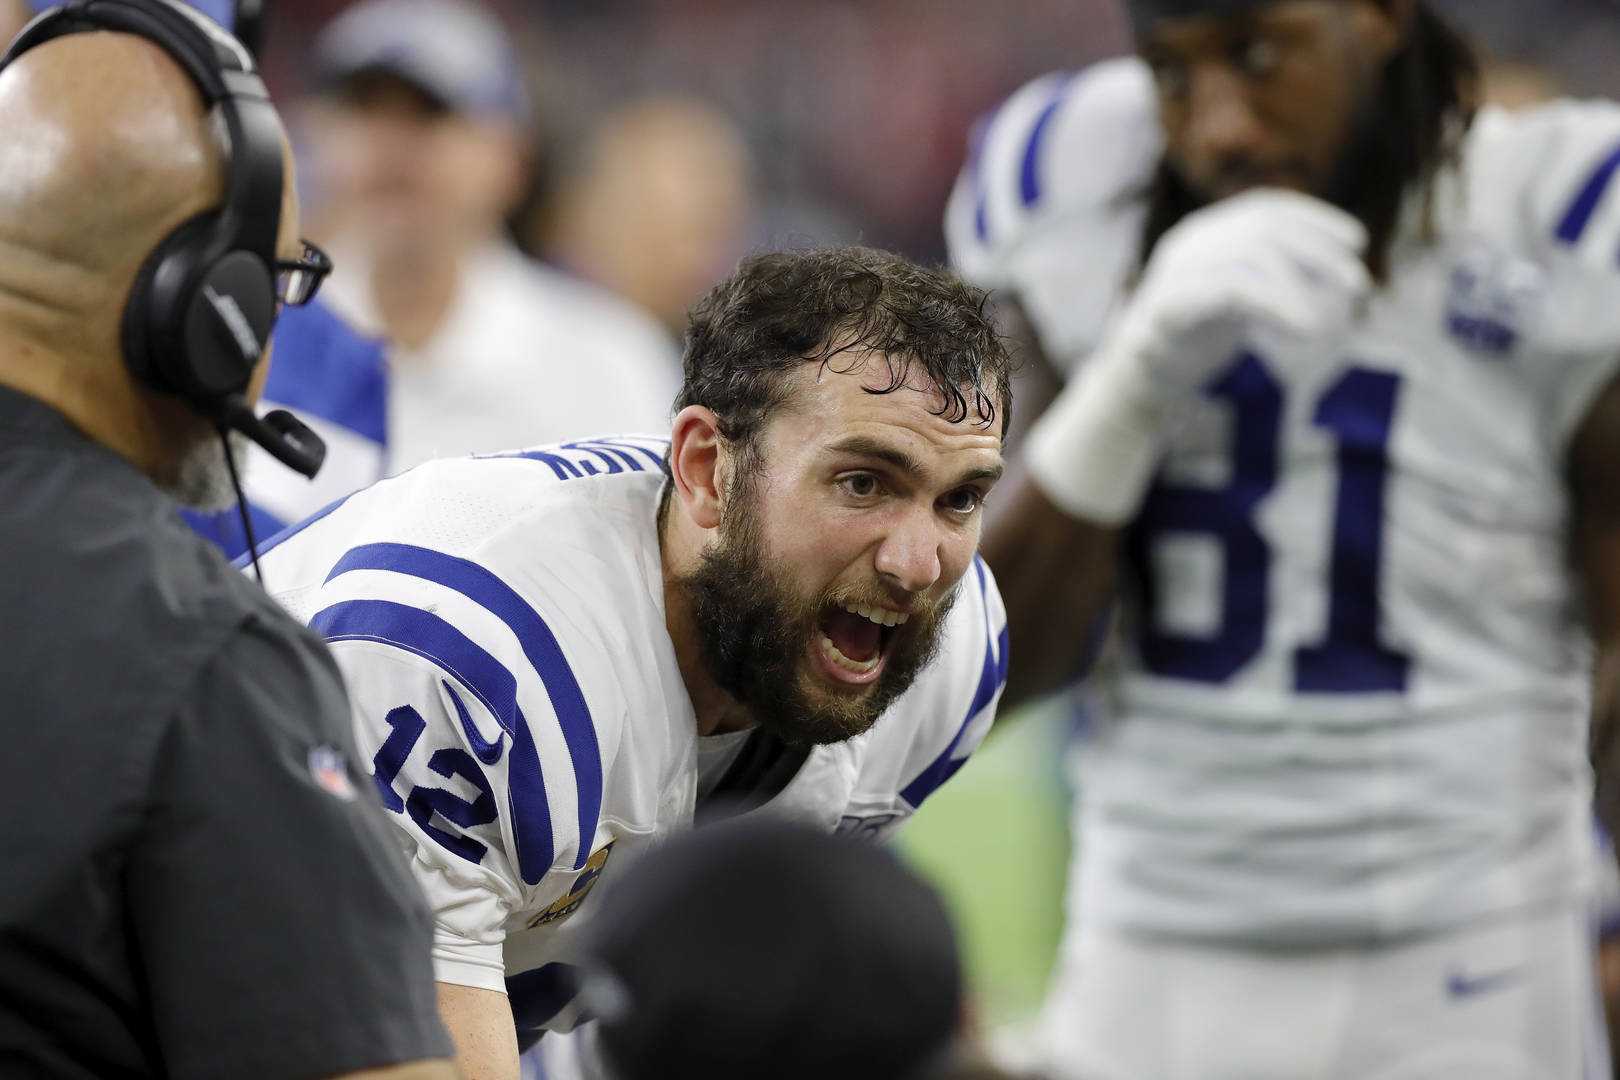  How Much Time Does Andrew Luck Miss?